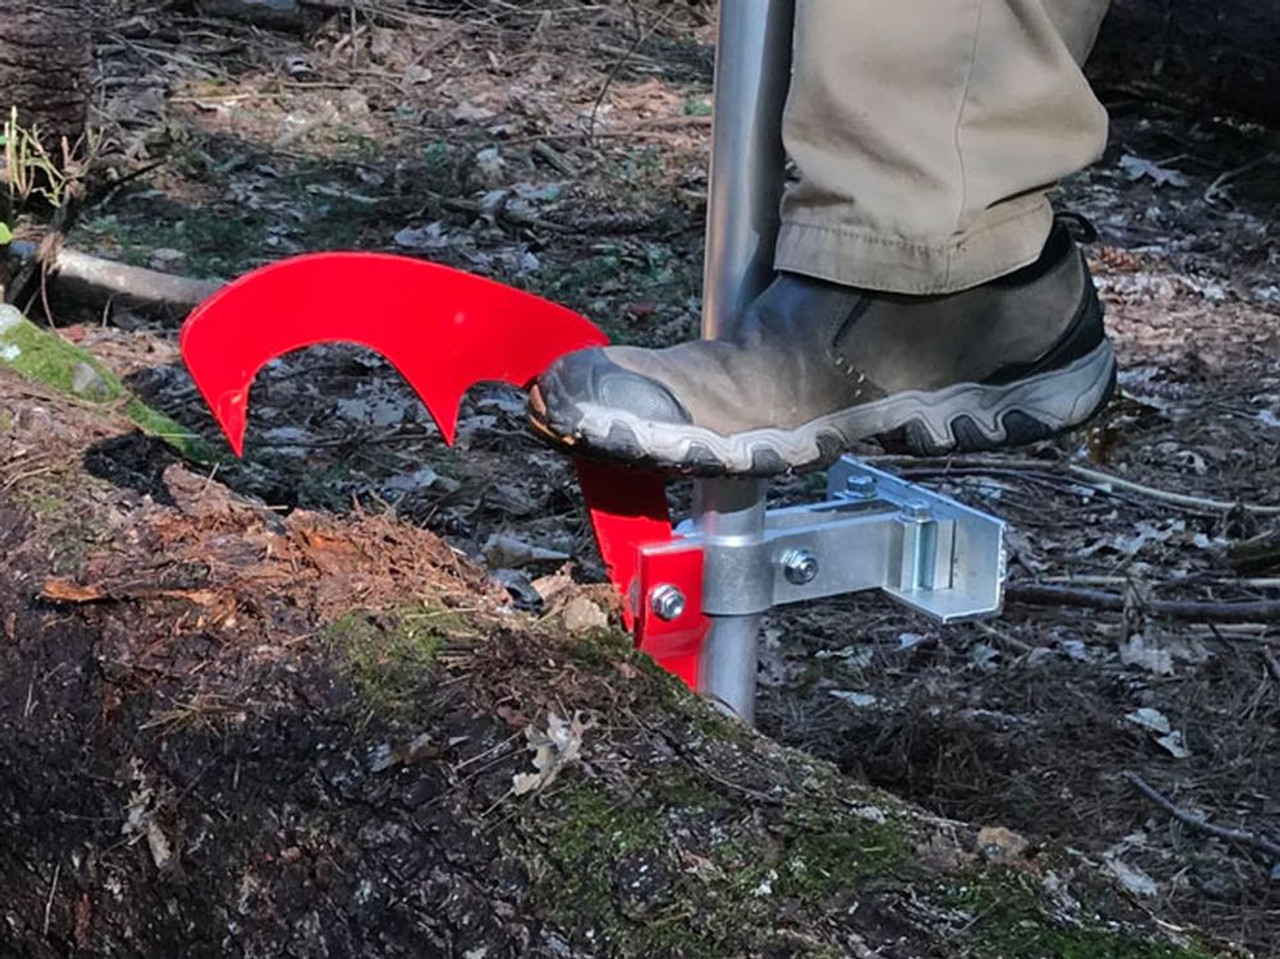 TimberPro Combination Log Jack, Log Lifter, Cant Hook from Woodchuck tools